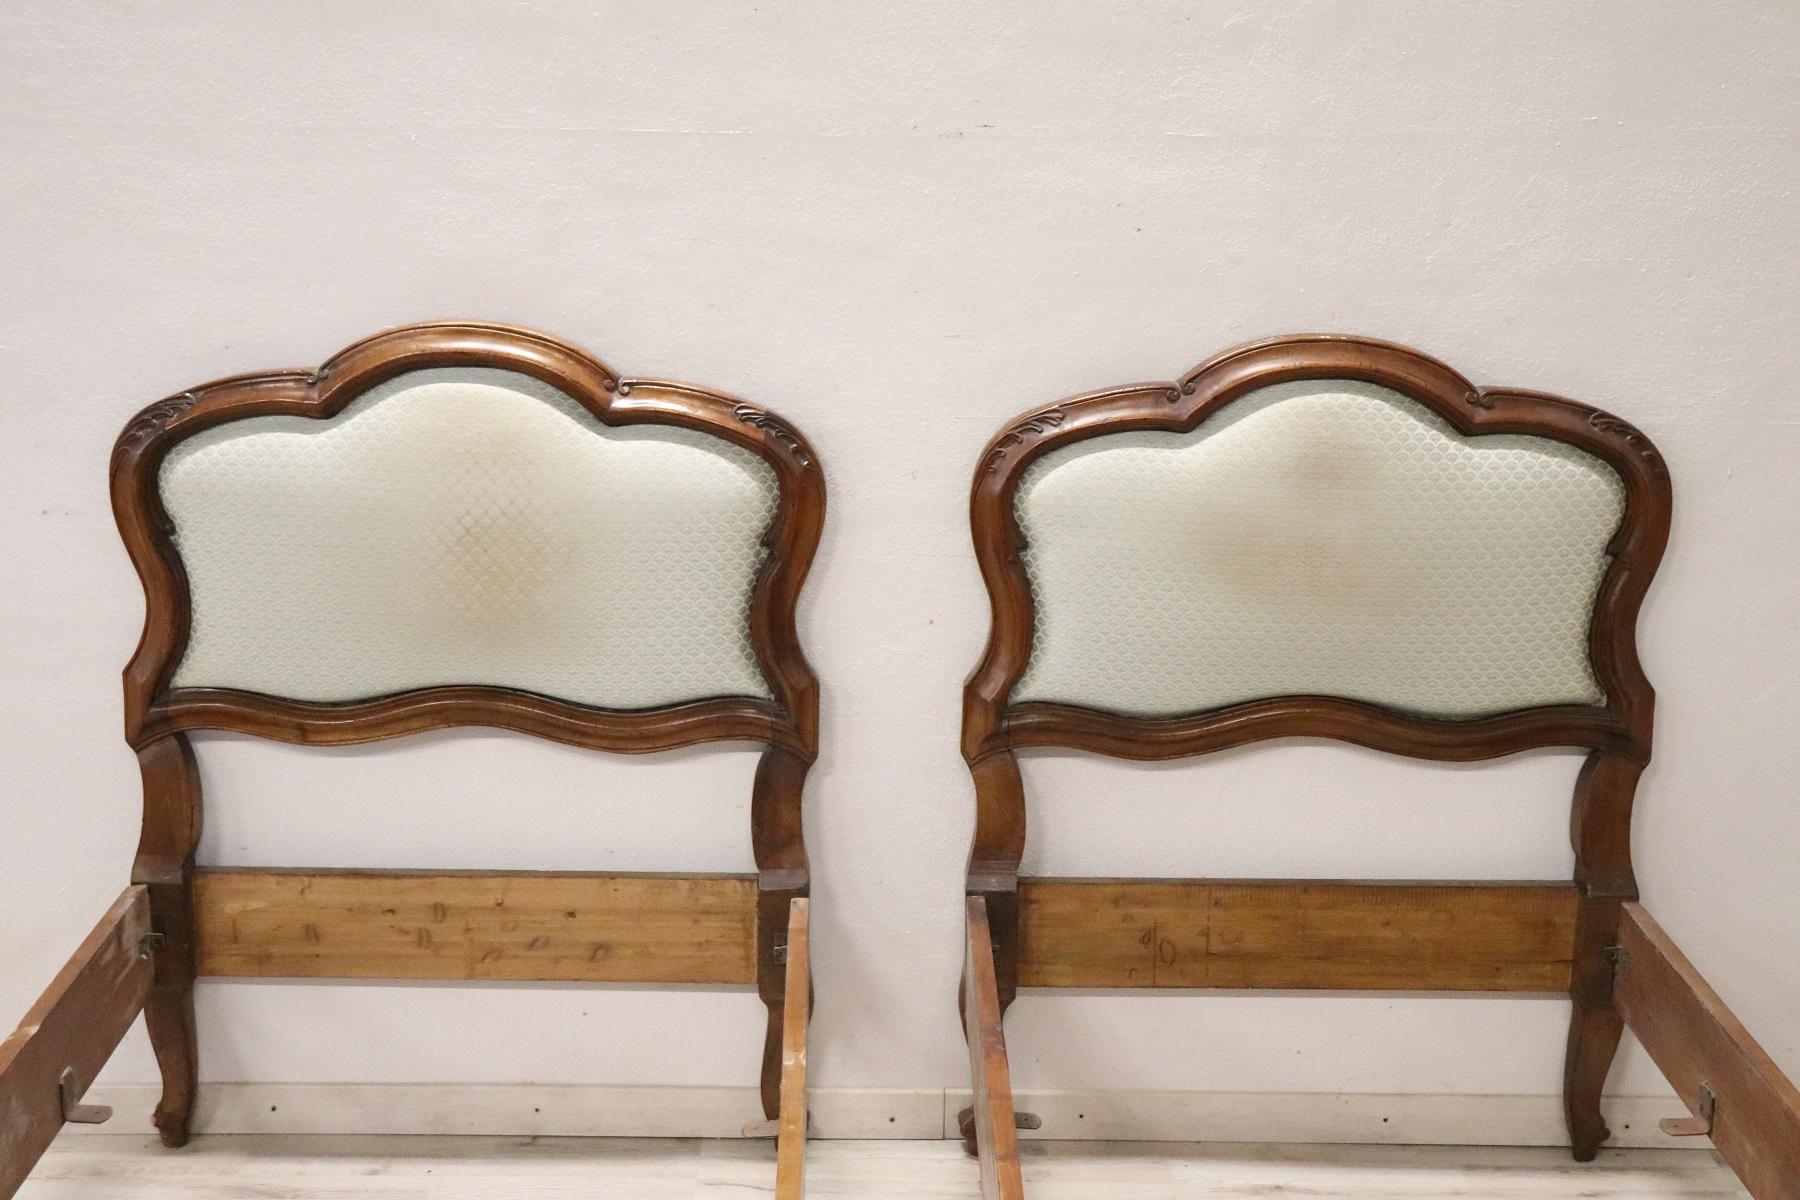 Beautiful Italian pair of single bed 19200s in walnut with finely carved on the front. The measurements shown are outside the internal are cm 82 x 200. In vintage goods conditions, stains in the fabric.
  